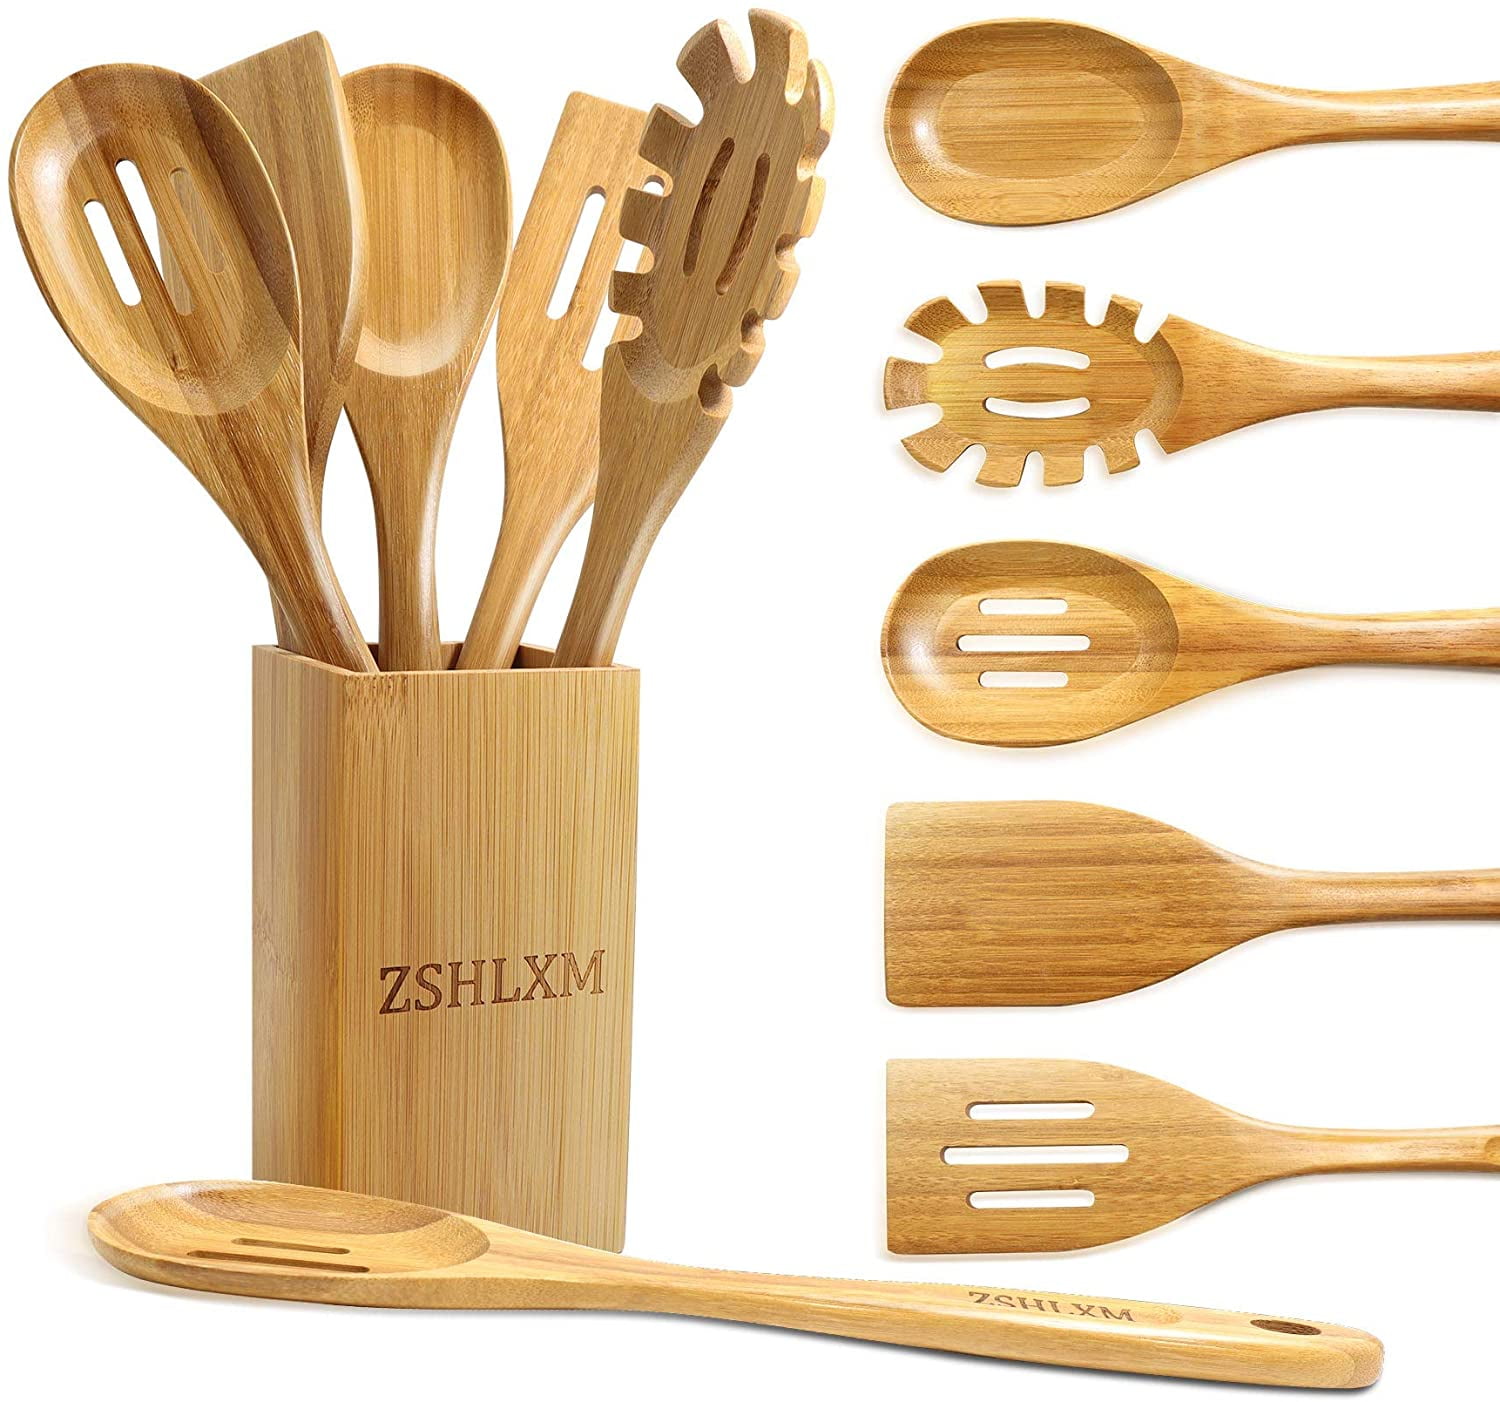 Details about   Wooden Bamboo Cooking Utensils Set 8pcs Wood Kitchen Utensil Set with Holder 